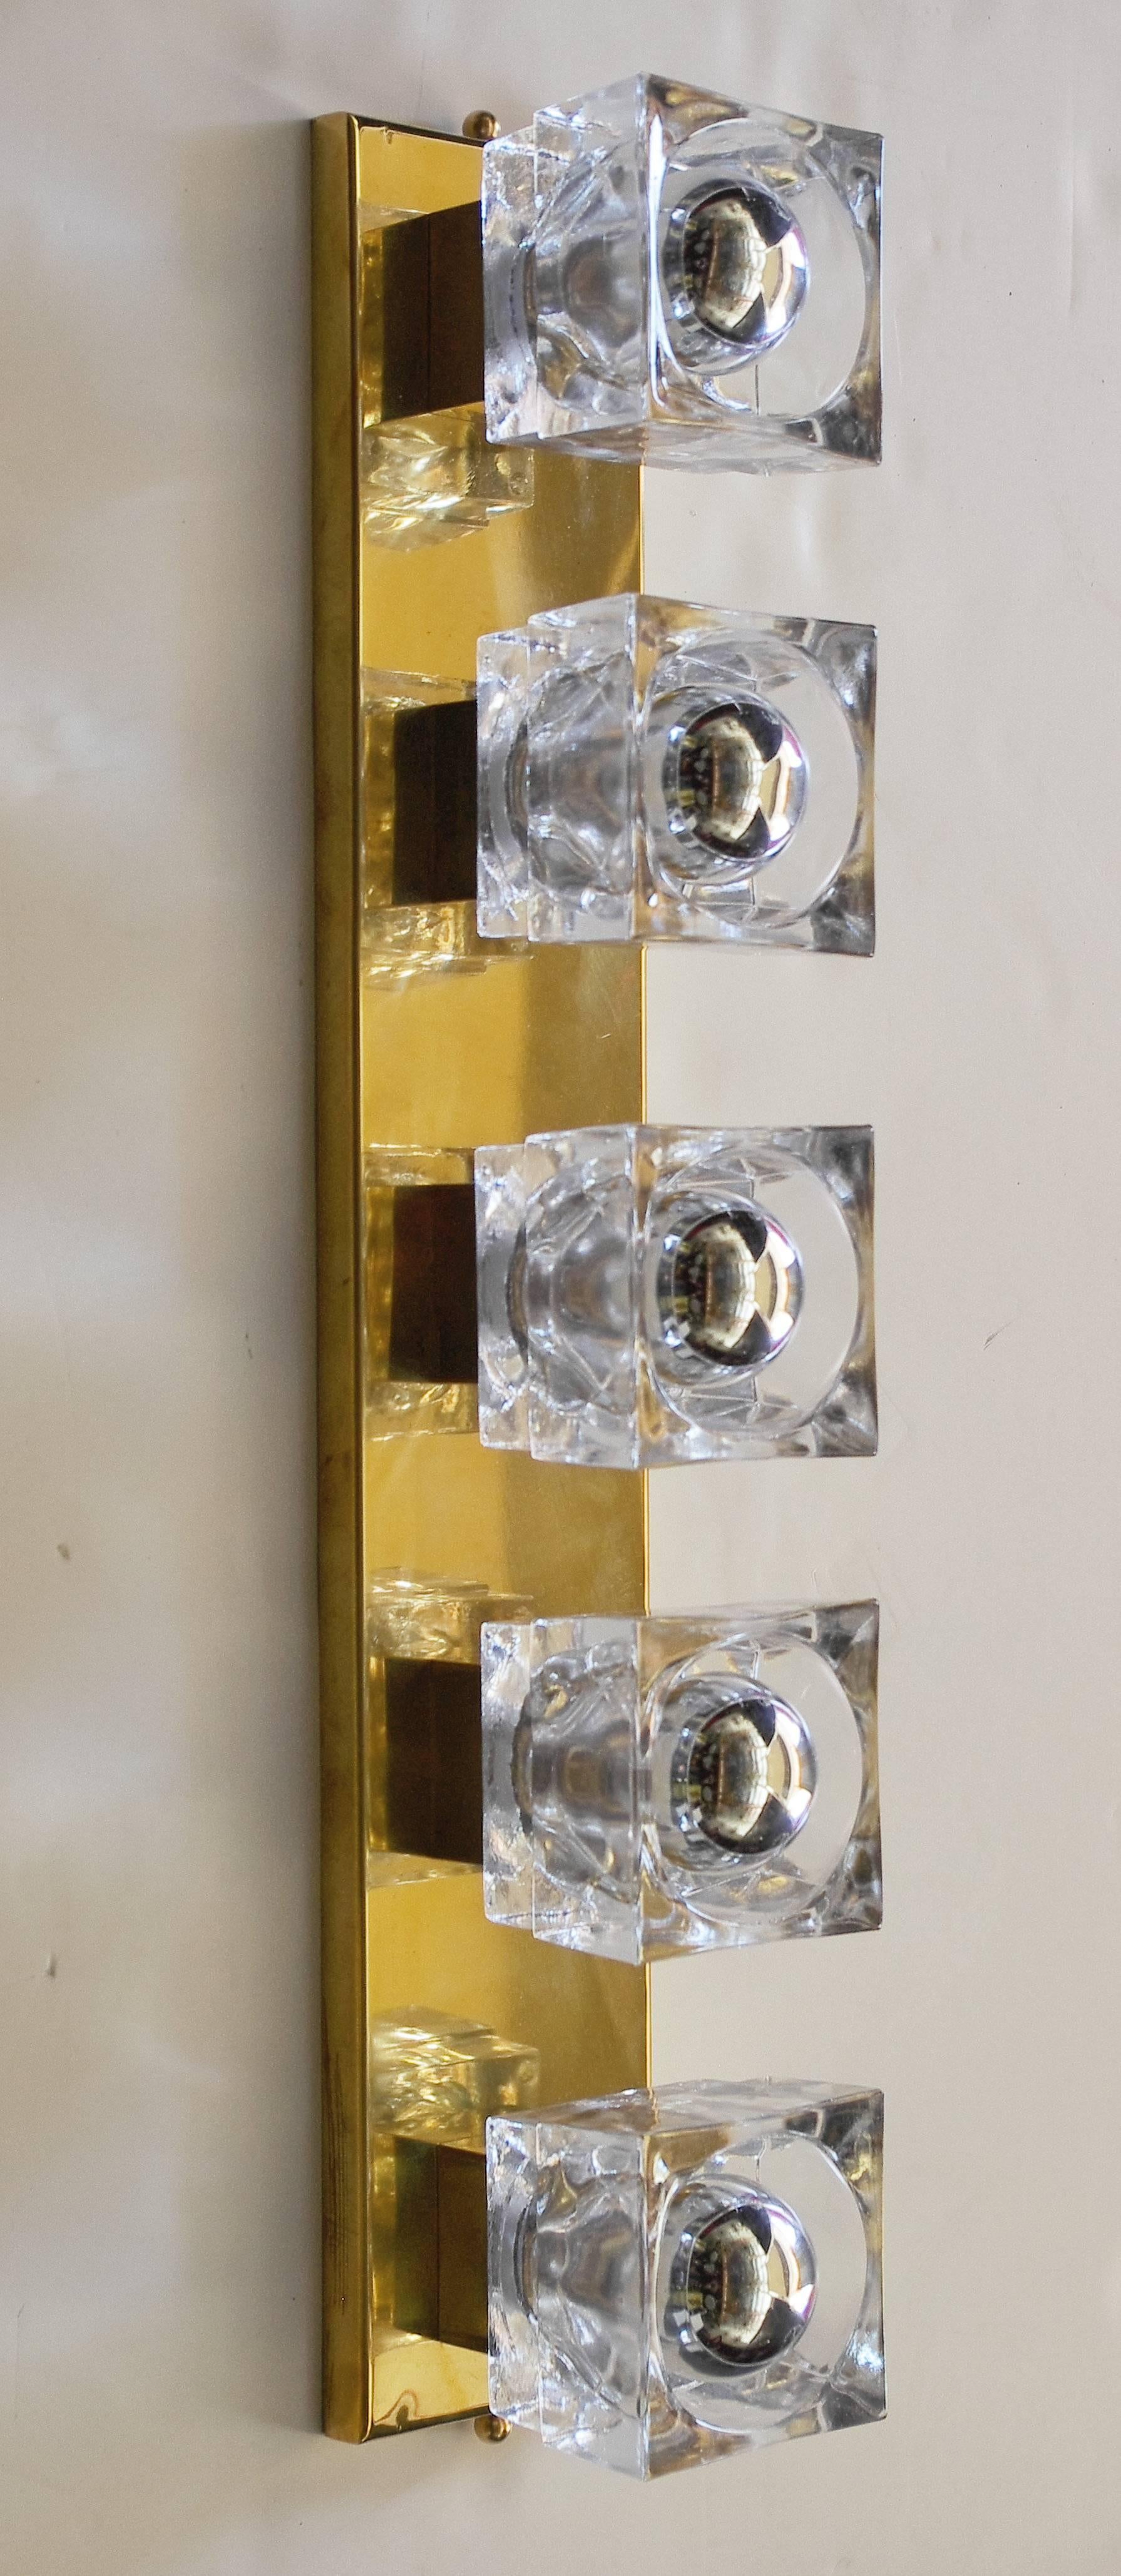 Italian wall sconce with Sciolari 1960s vintage clear Murano glass cubes mounted on newly made polished brass frames / Designed by Fabio Bergomi for Fabio Ltd / Made in Italy
5 lights / E12 or E14 type / max 40W each
Measures: Height 23 inches /